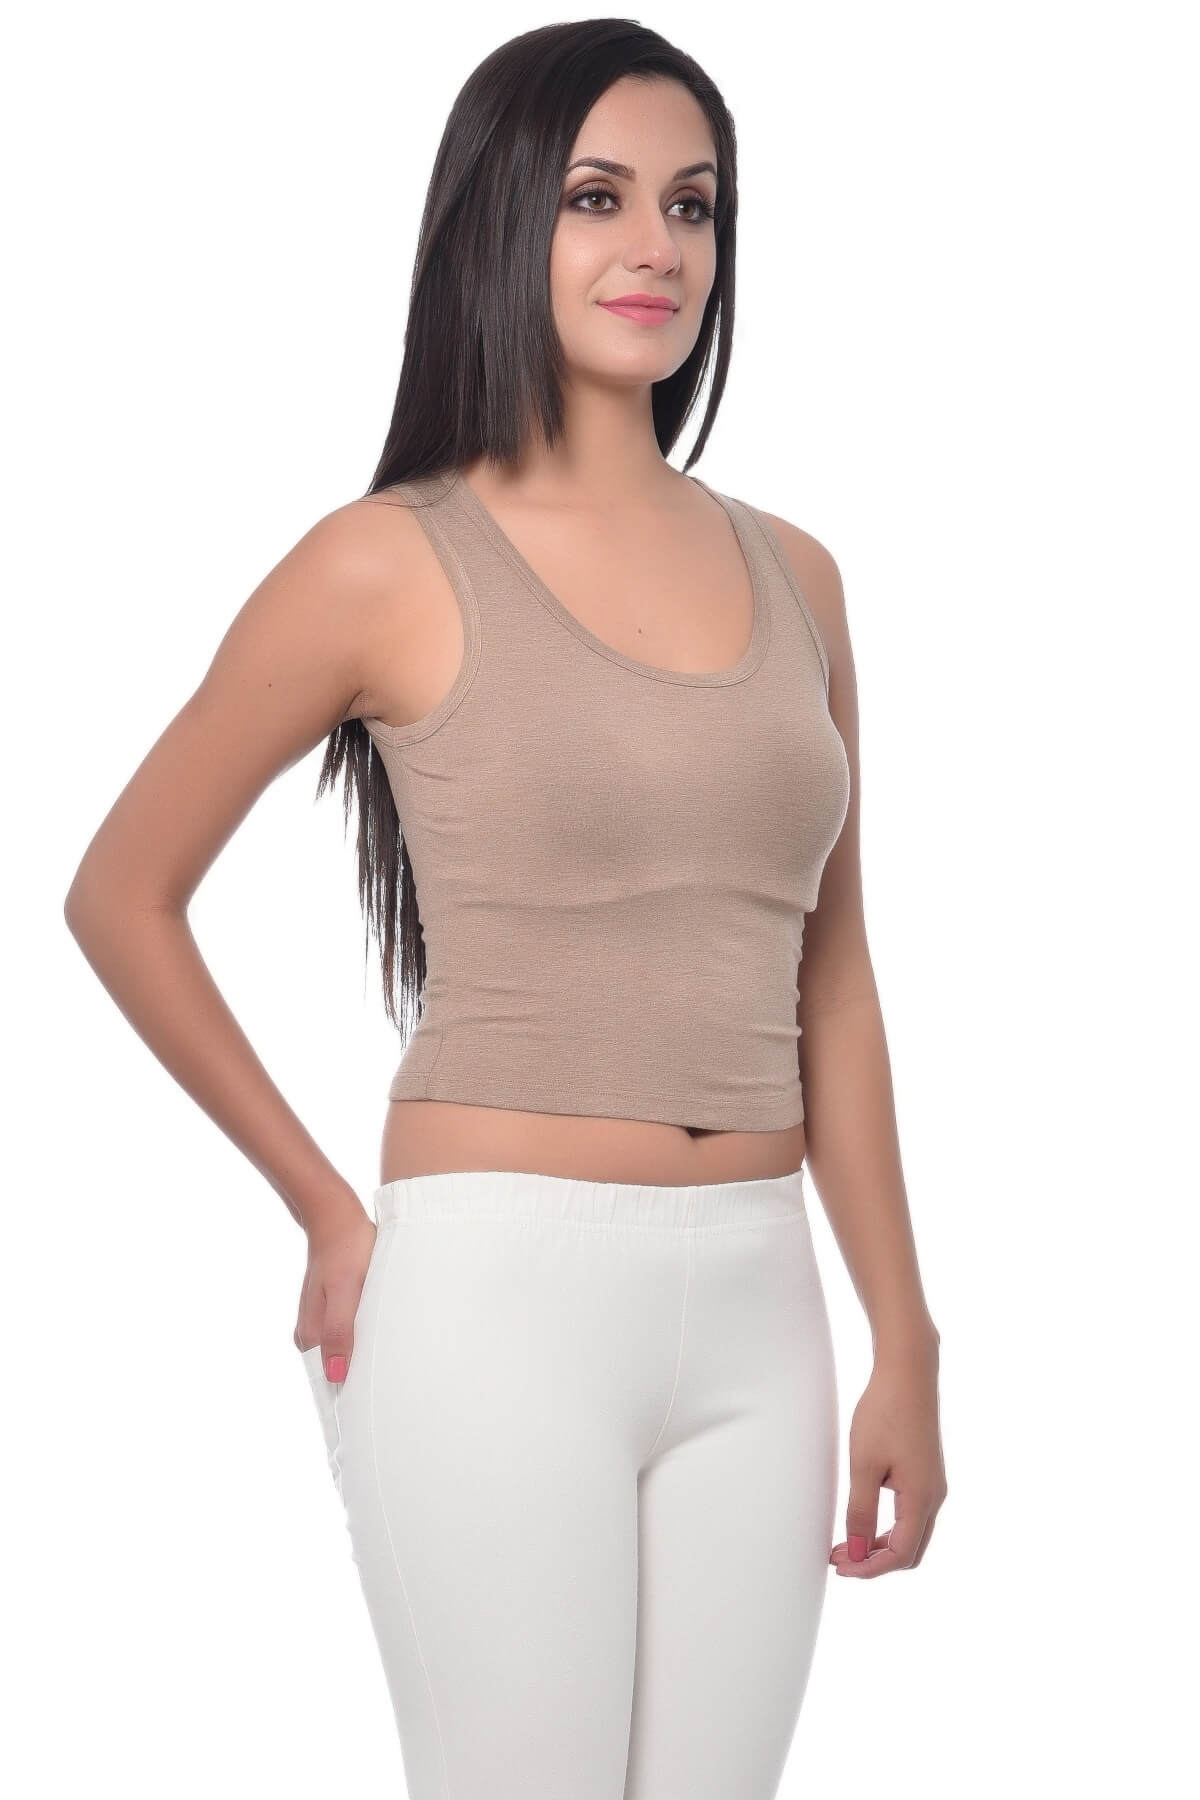 https://frenchtrendz.com/images/thumbs/0006466_frenchtrendz-viscose-spandex-camel-crop-top.jpeg